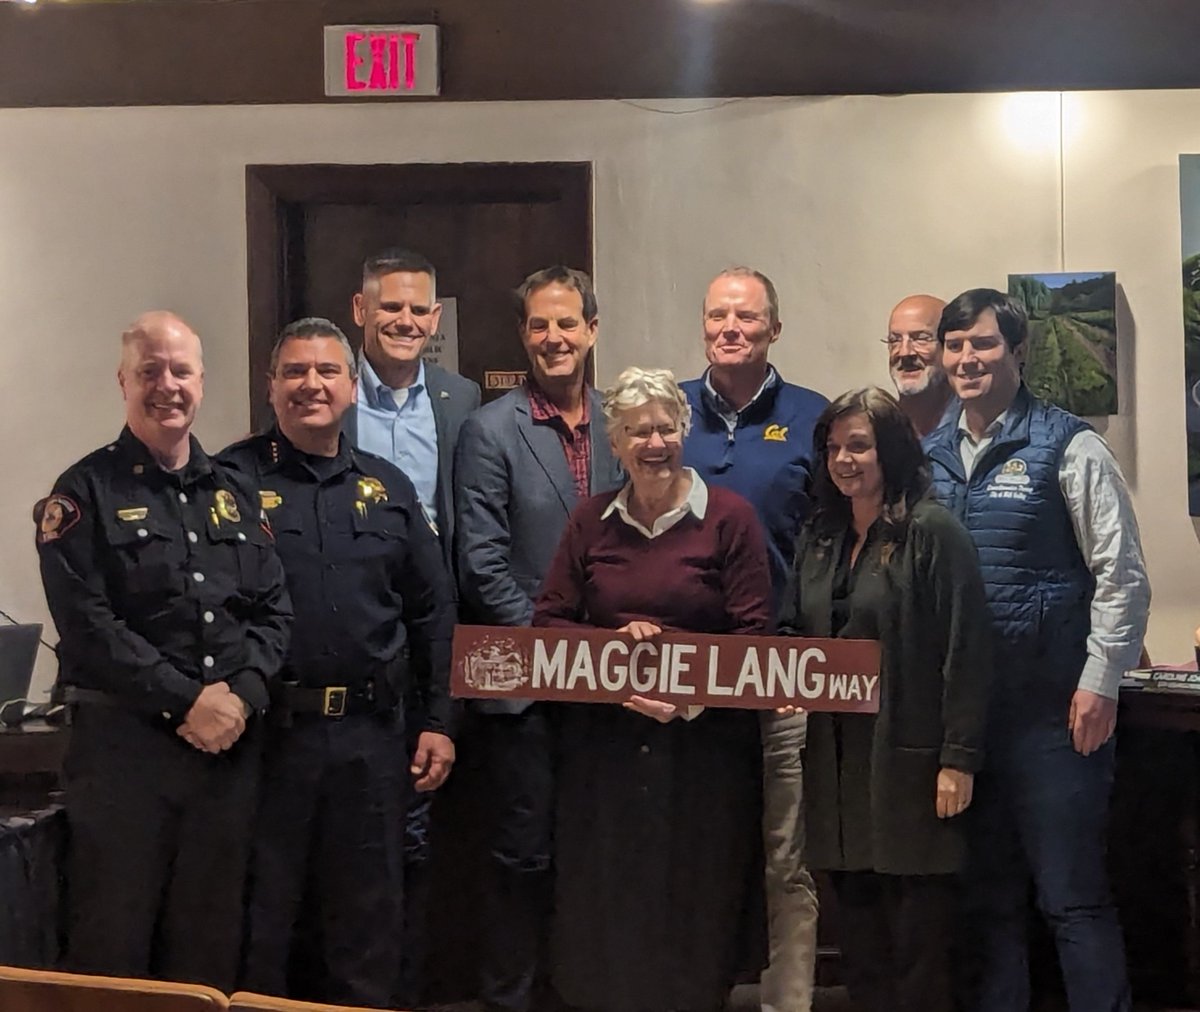 SMFD recognizes the extraordinary contributions of Maggie Lang, honoring her as an exemplary volunteer, preparedness advocate, community builder. She leaves an enduring legacy of safety and residency in our community. With gratitude we celebrate you, Maggie.👏👏👏